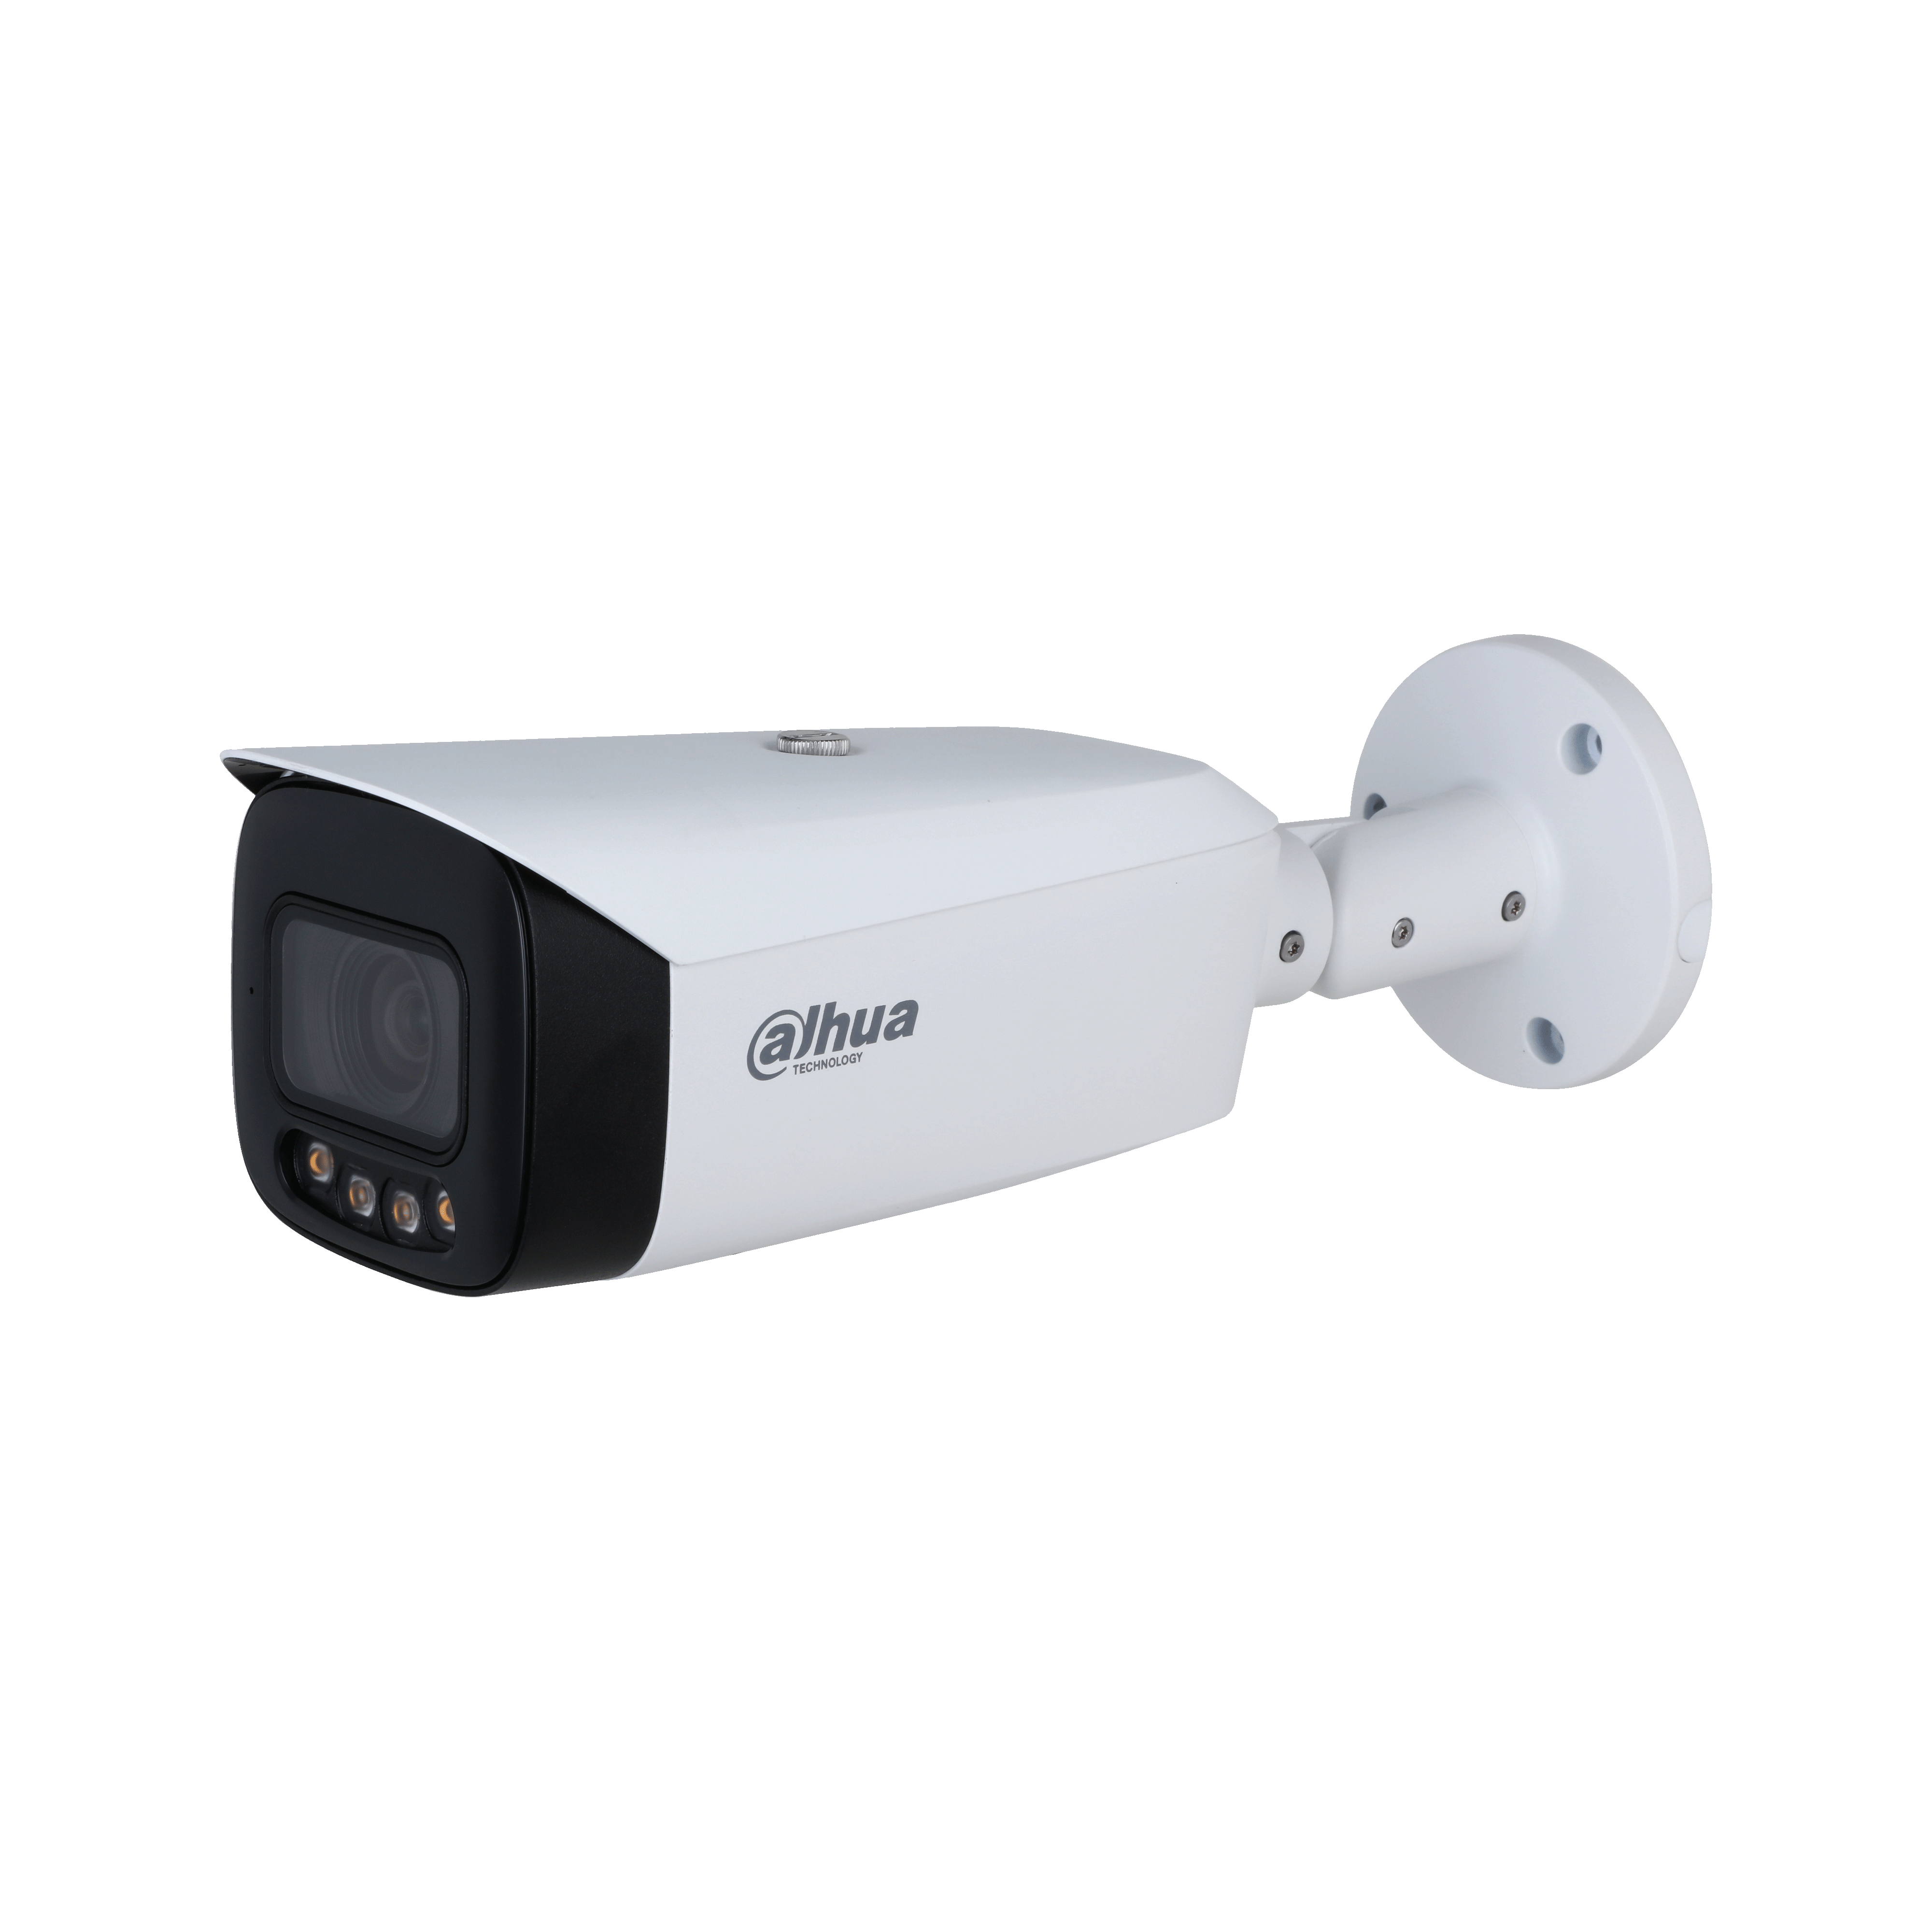 IPC-HFW5849T1P-ASE-LED - Dahua - 8MP Full-color Fixed-focal Warm LED Bullet WizMind Network Camera